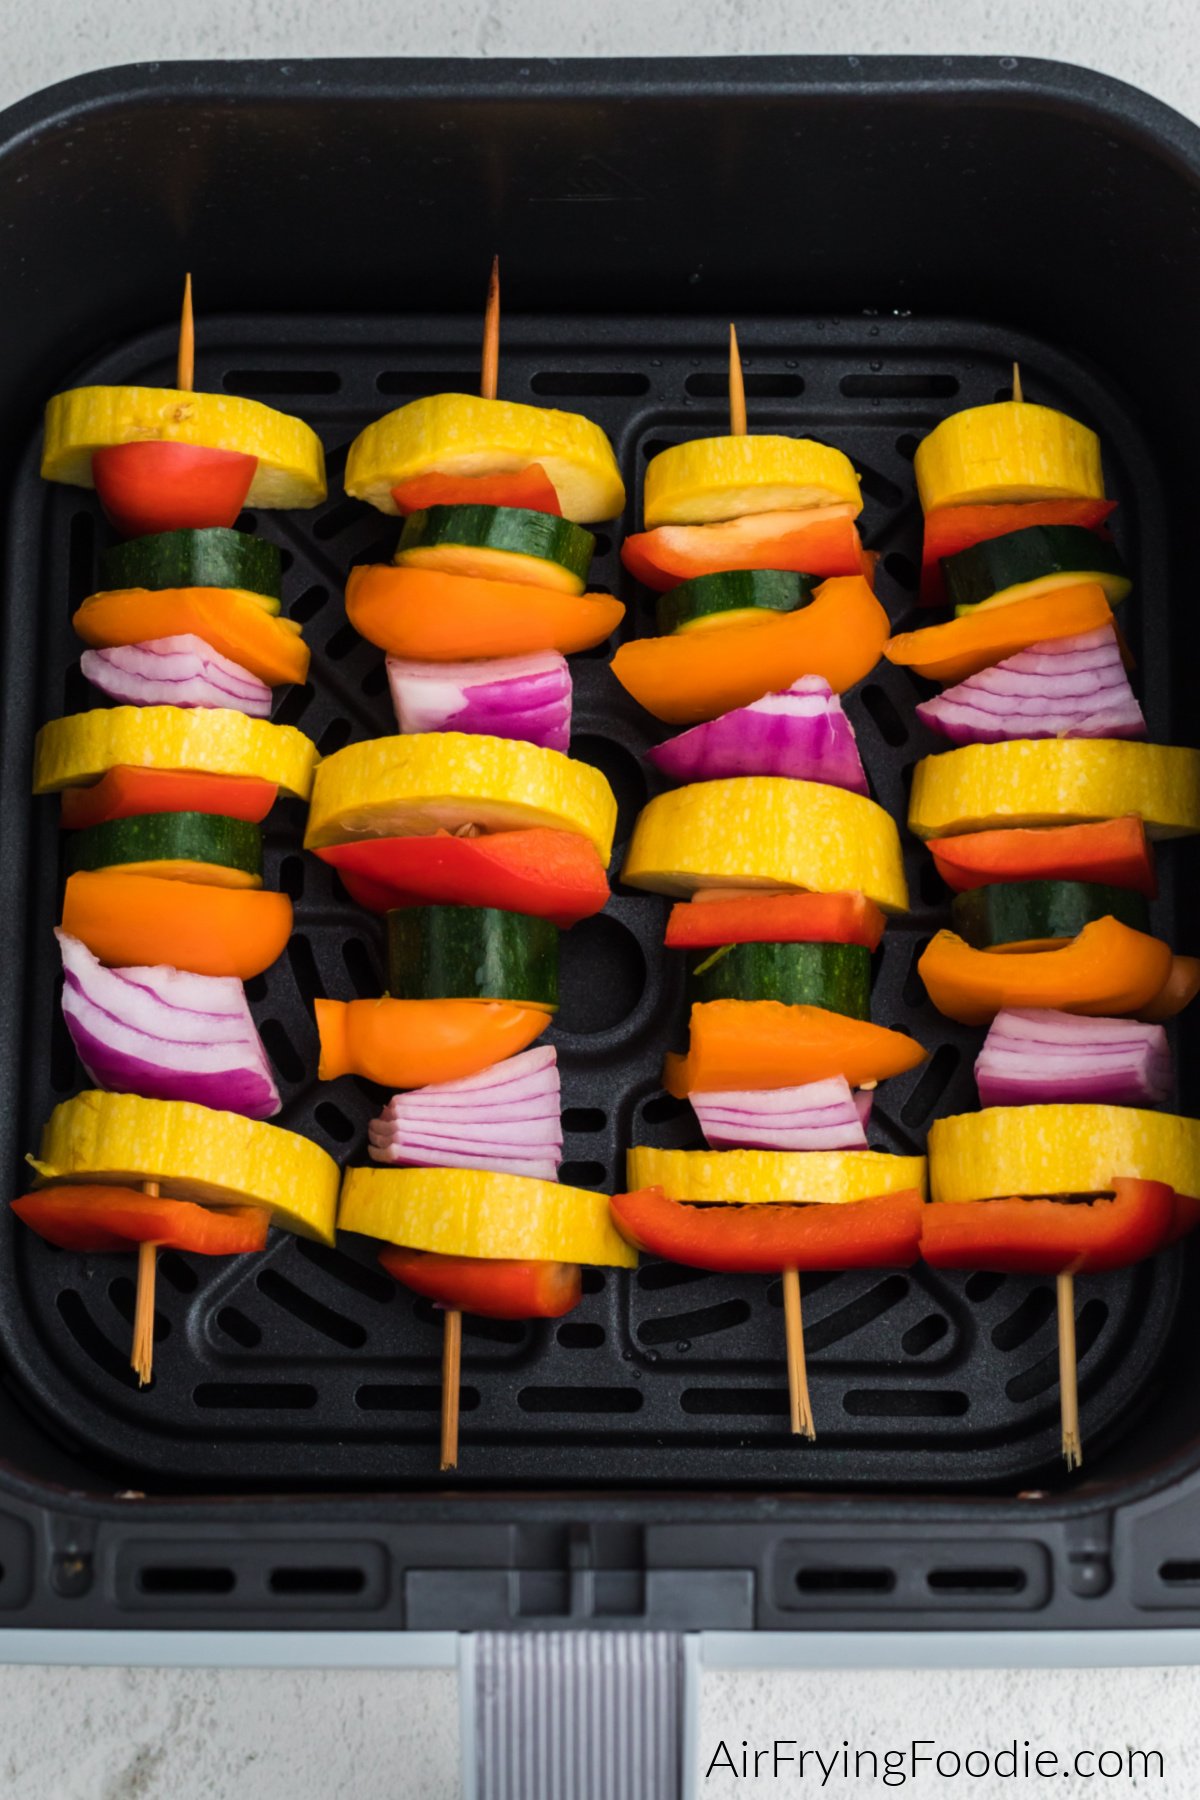 Vegetables rotated on wooden skewers and placed into the basket of the air fryer.